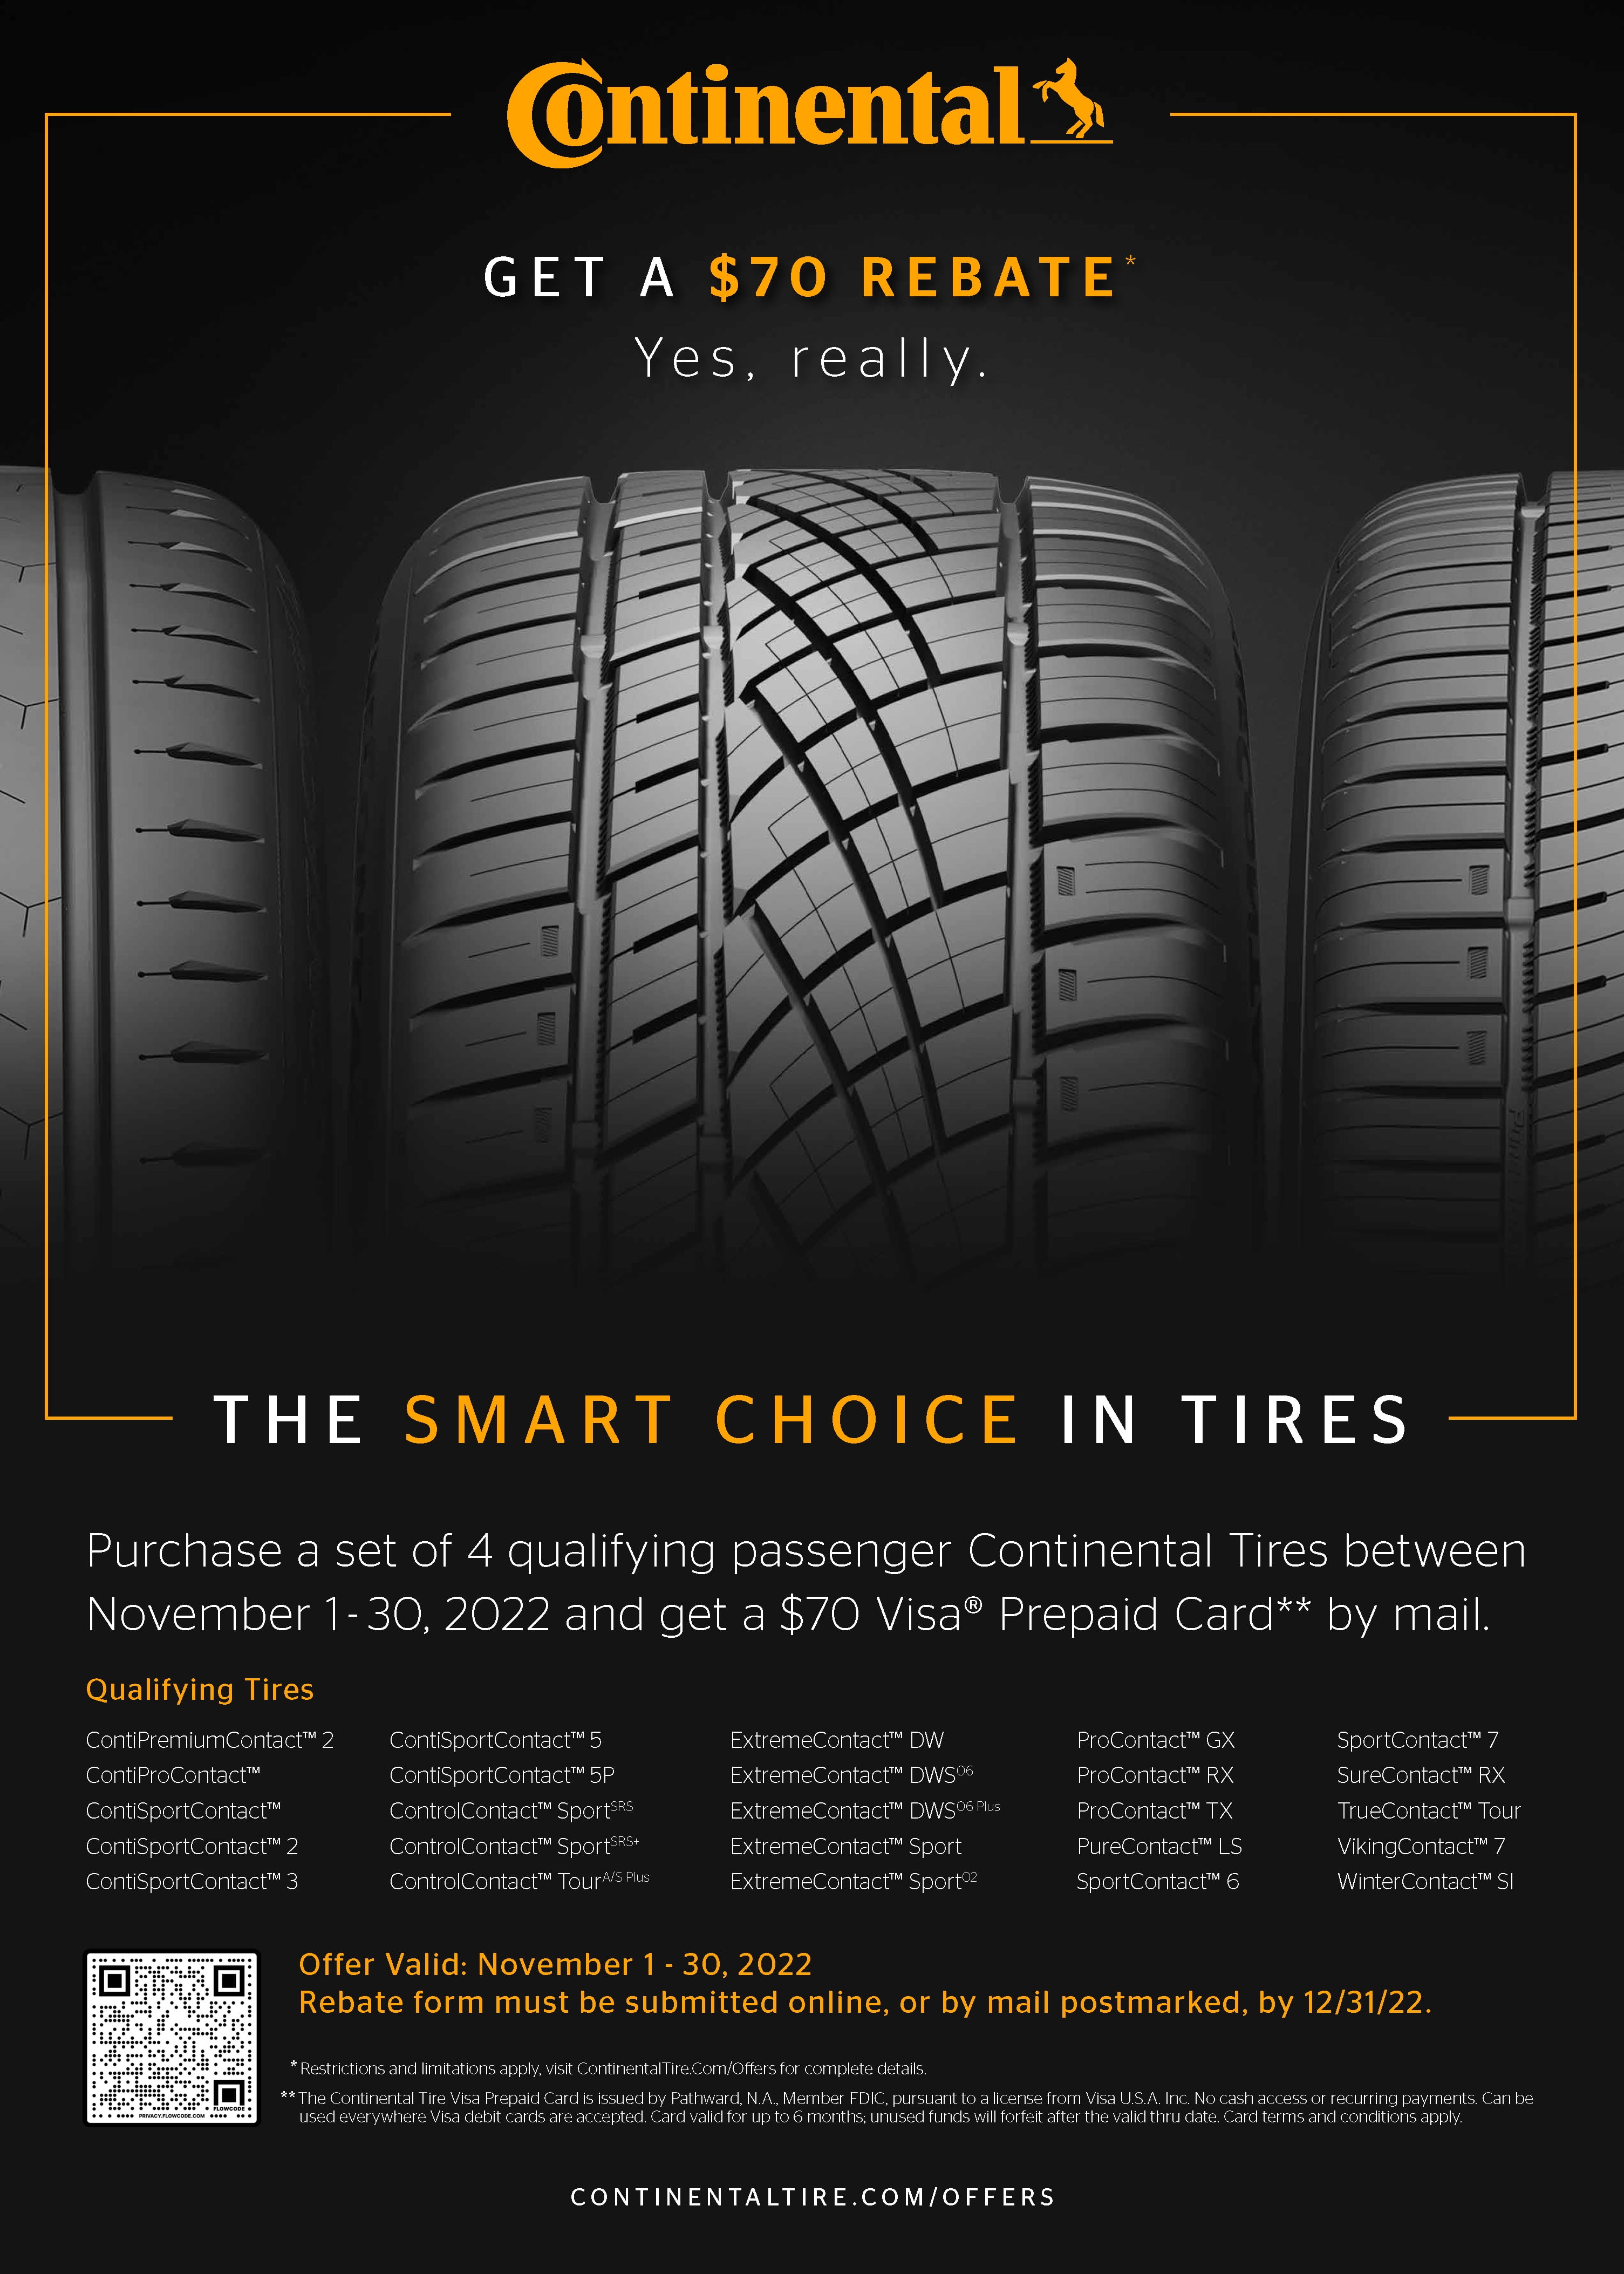 CONTINENTAL EXTREMECONTACT SPORT P235/40R18 95 Y BSW SUMMER TIRE 